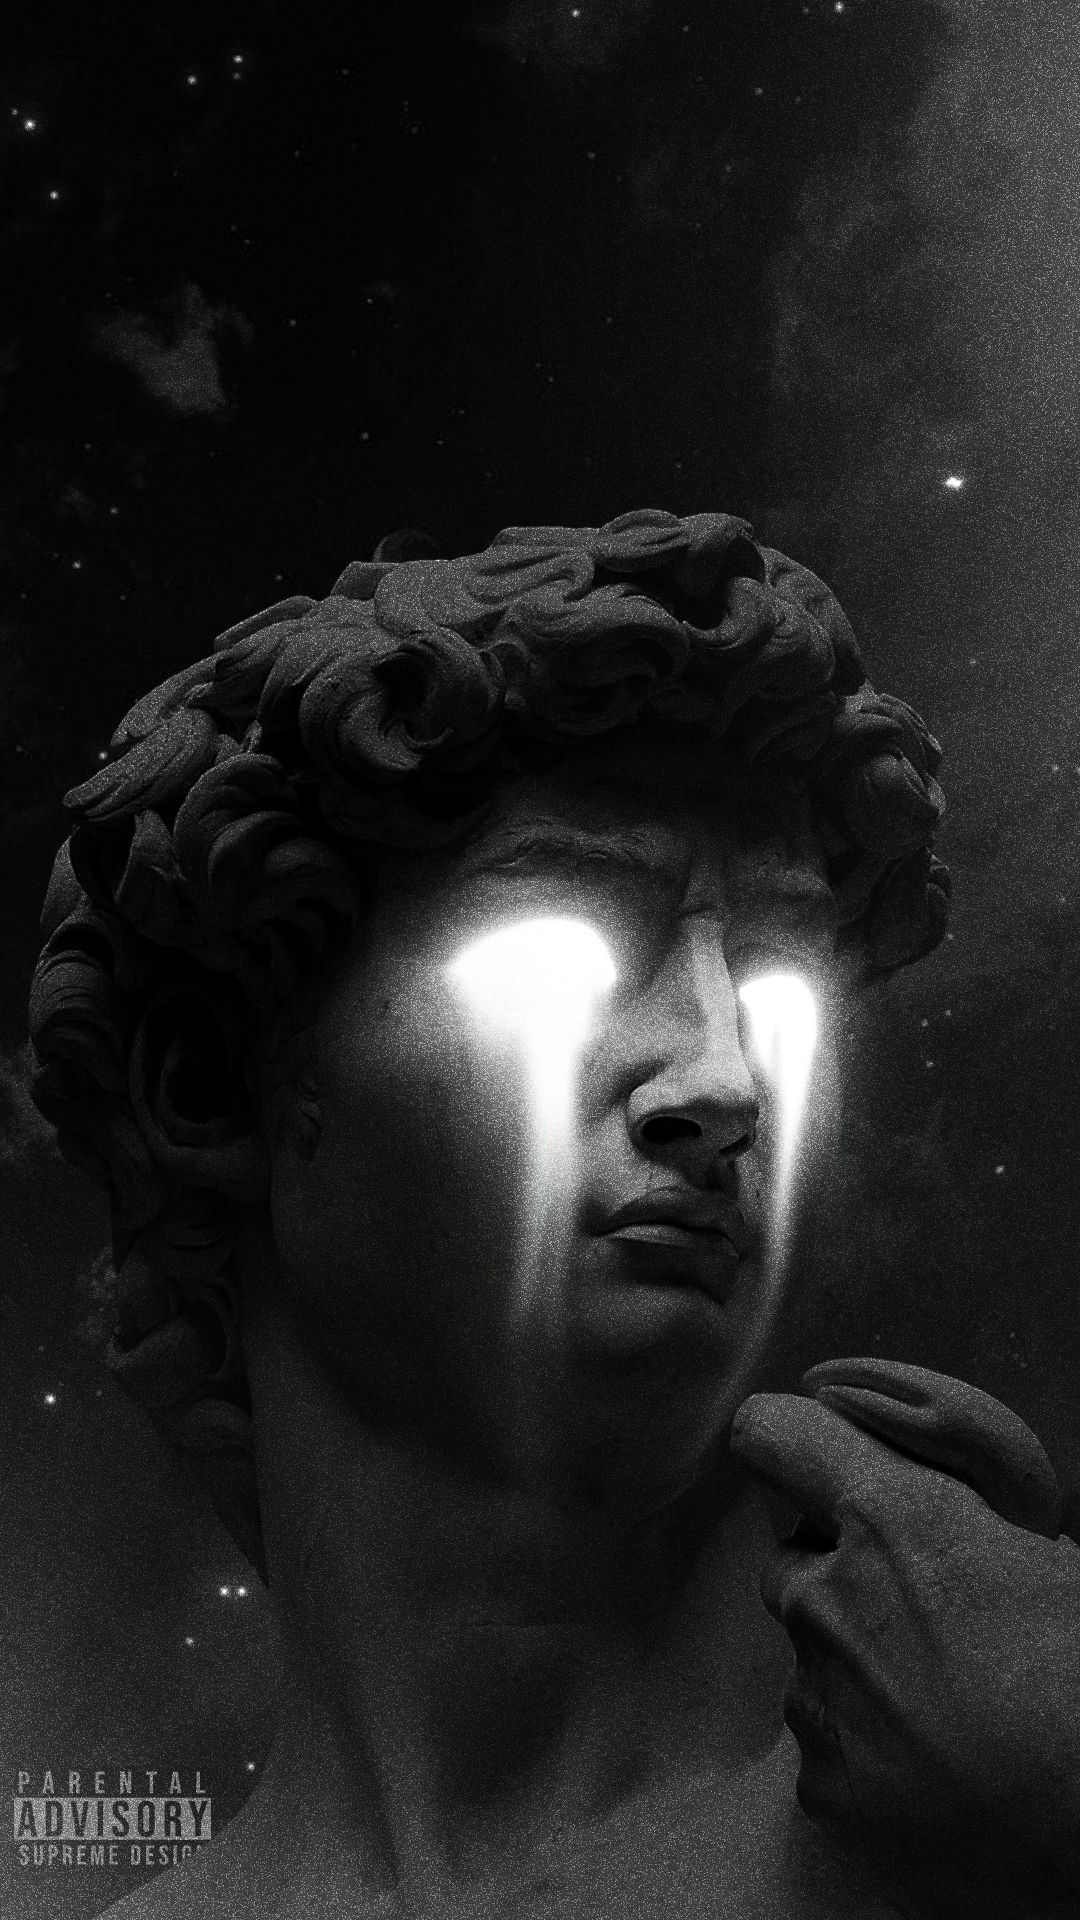 Black and white aesthetic of a statue of a man with his eyes glowing - Greek mythology, Greek statue